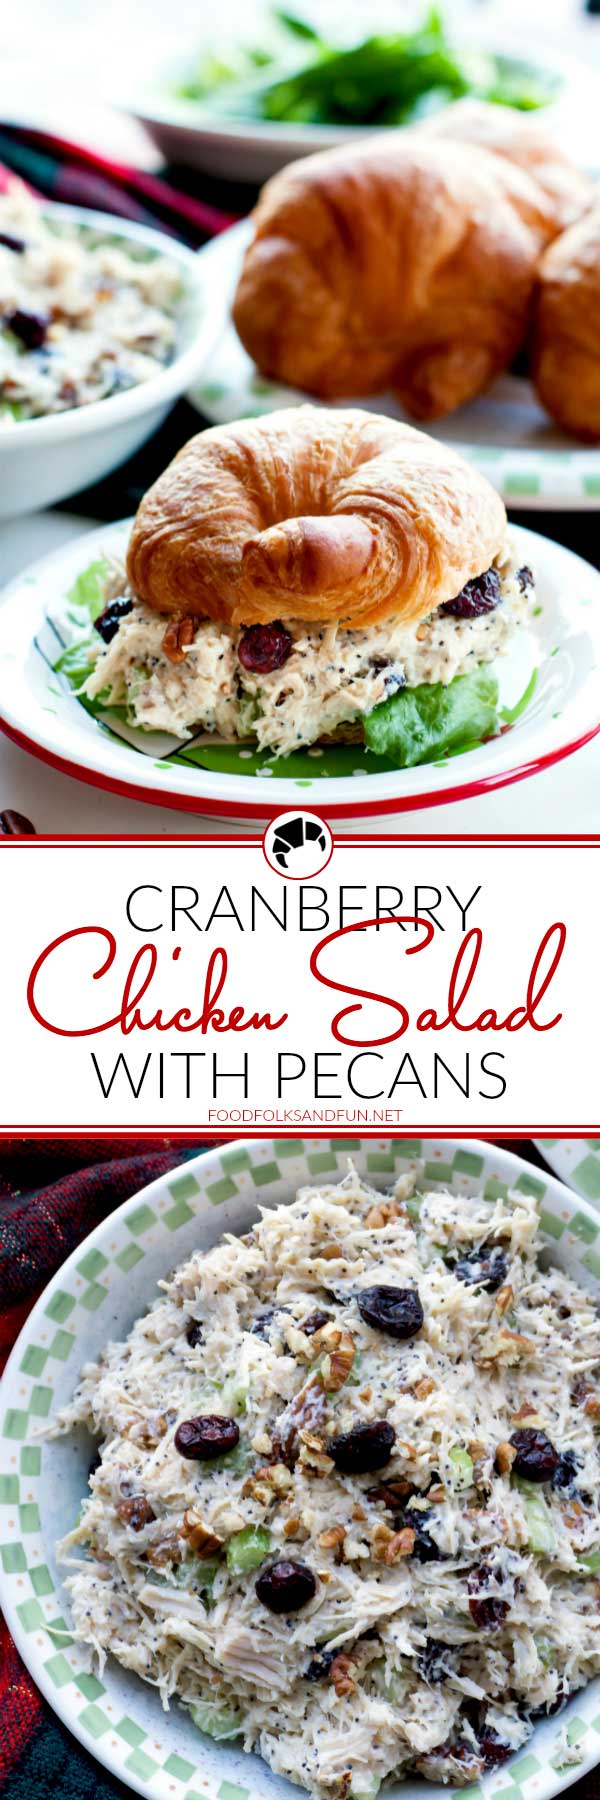 This Cranberry Chicken Salad with Pecans recipe is so creamy and filled with cranberries, celery, toasted pecans, orange zest, and poppy seeds. Serve it on croissants, rolls, as a wrap, or on a bed of lettuce. via @foodfolksandfun